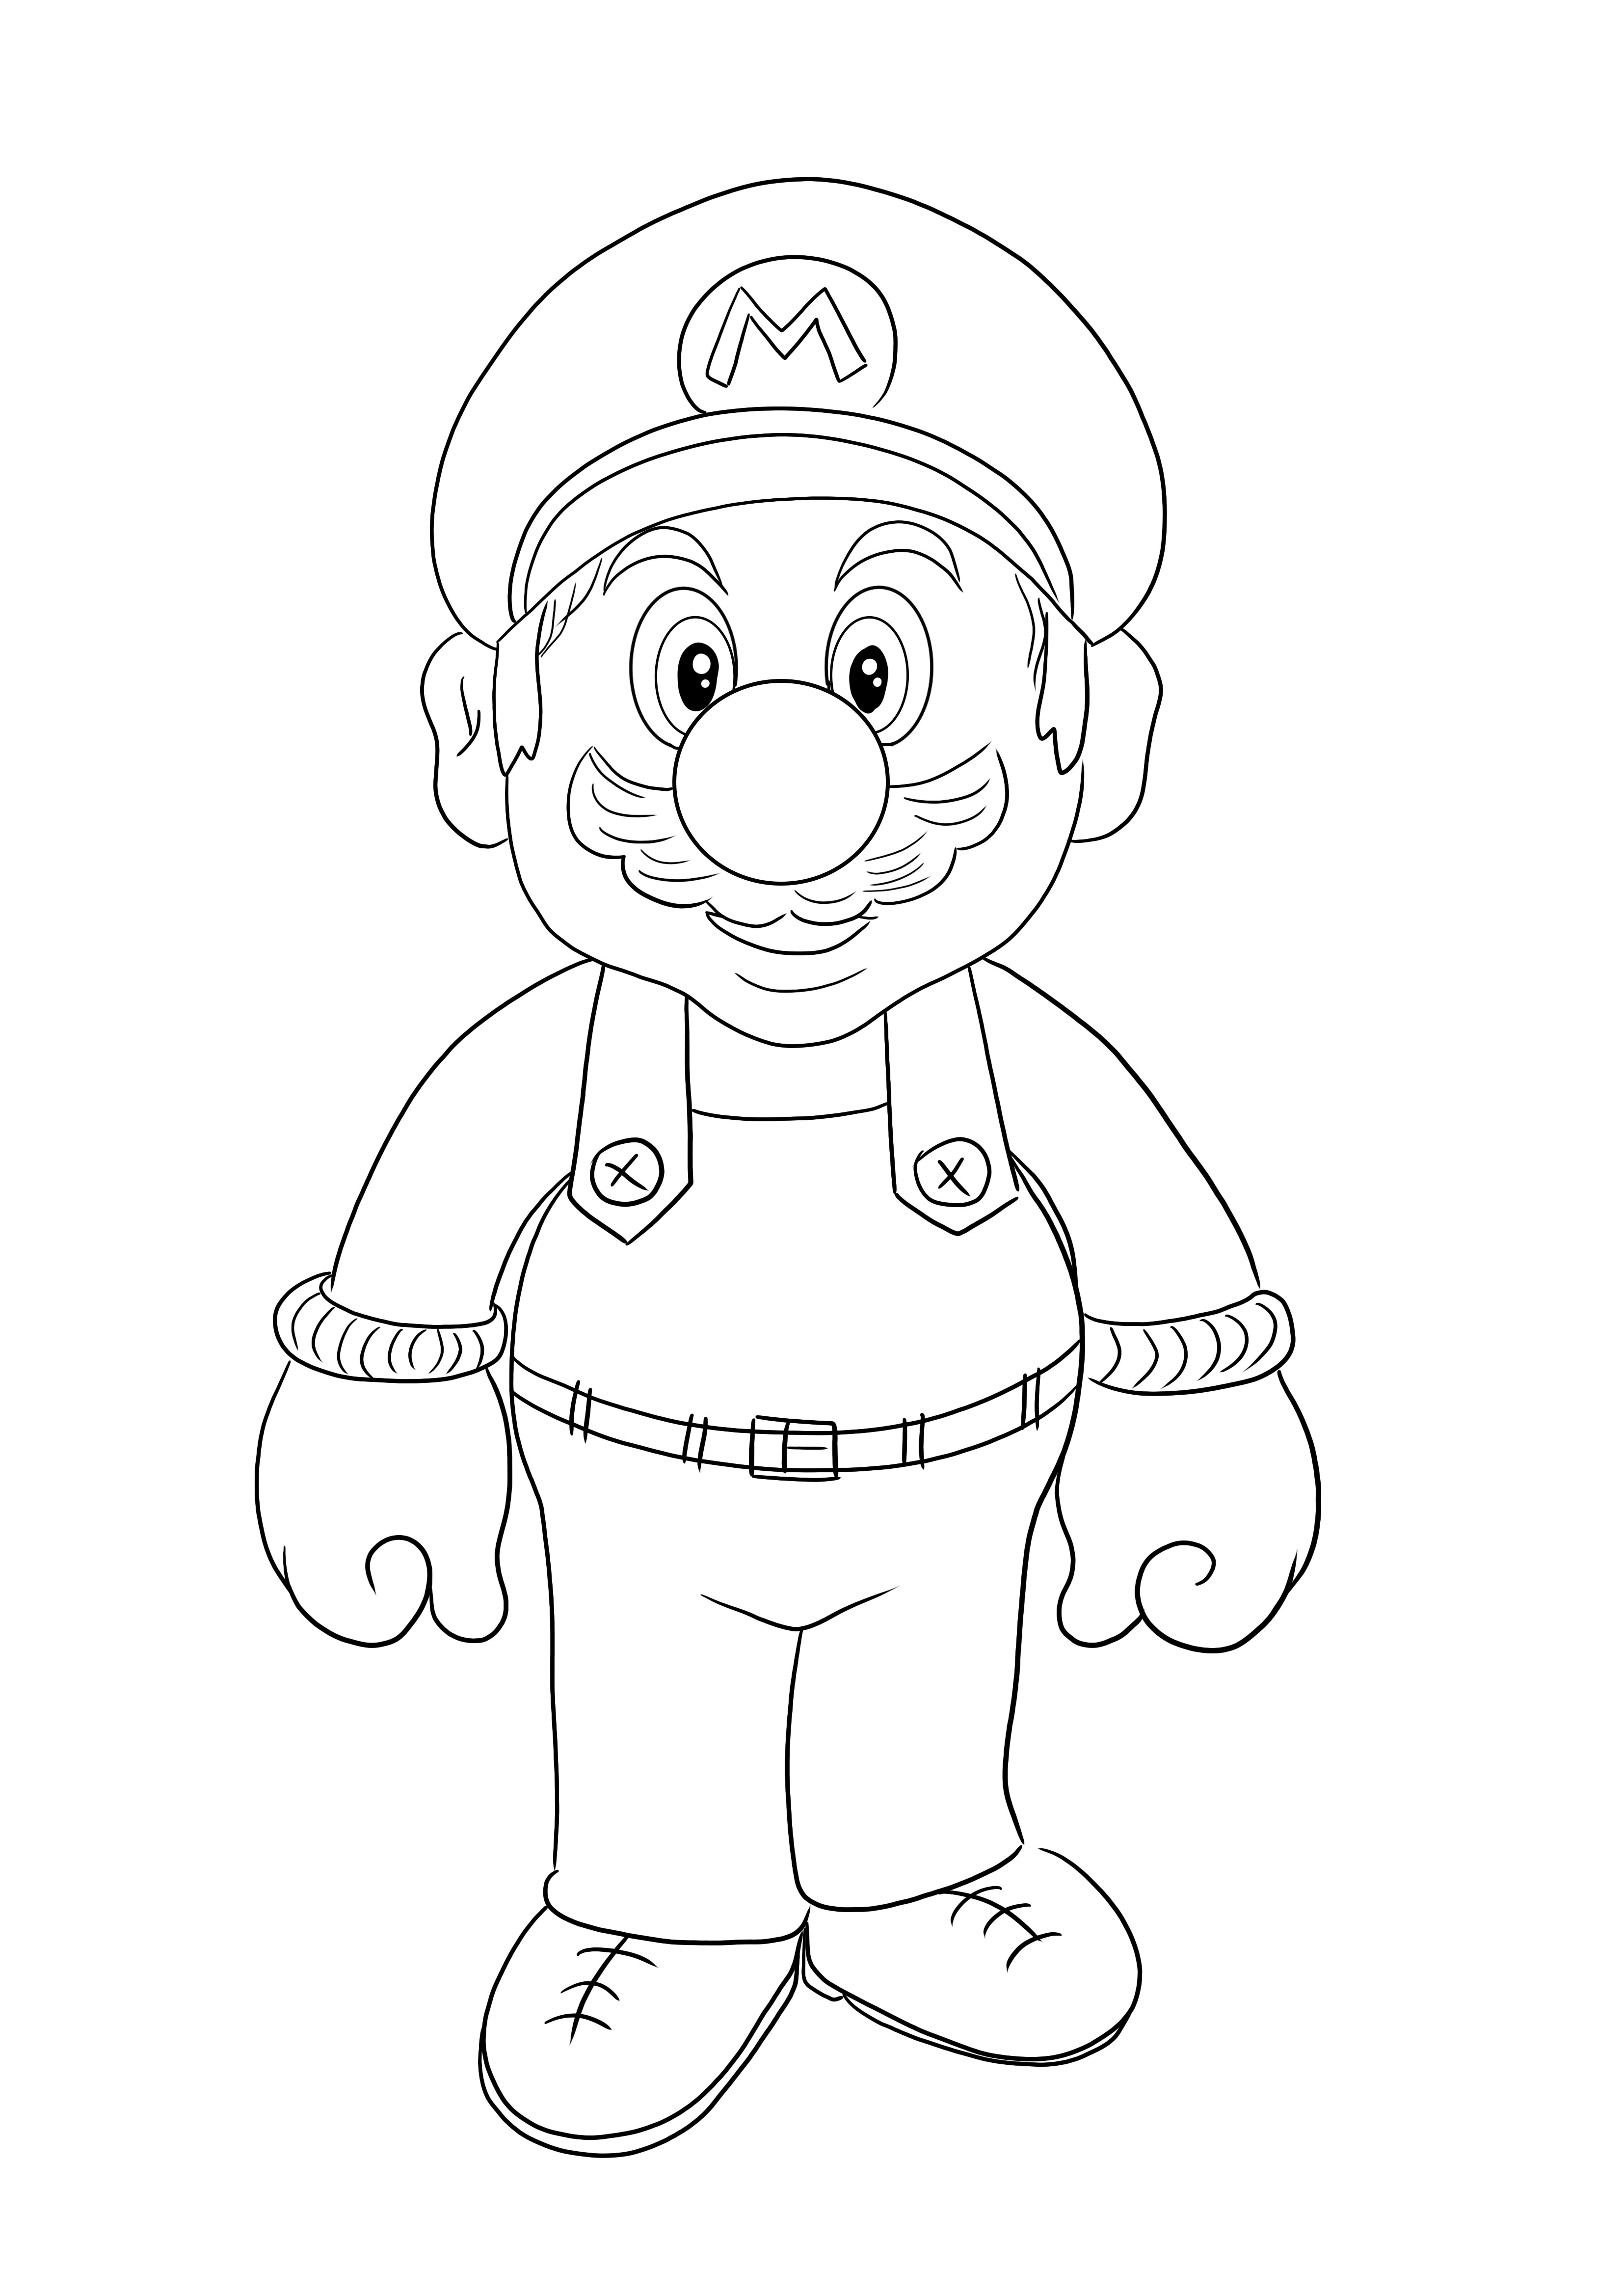 Super Mario free coloring sheet to be downloaded and colored